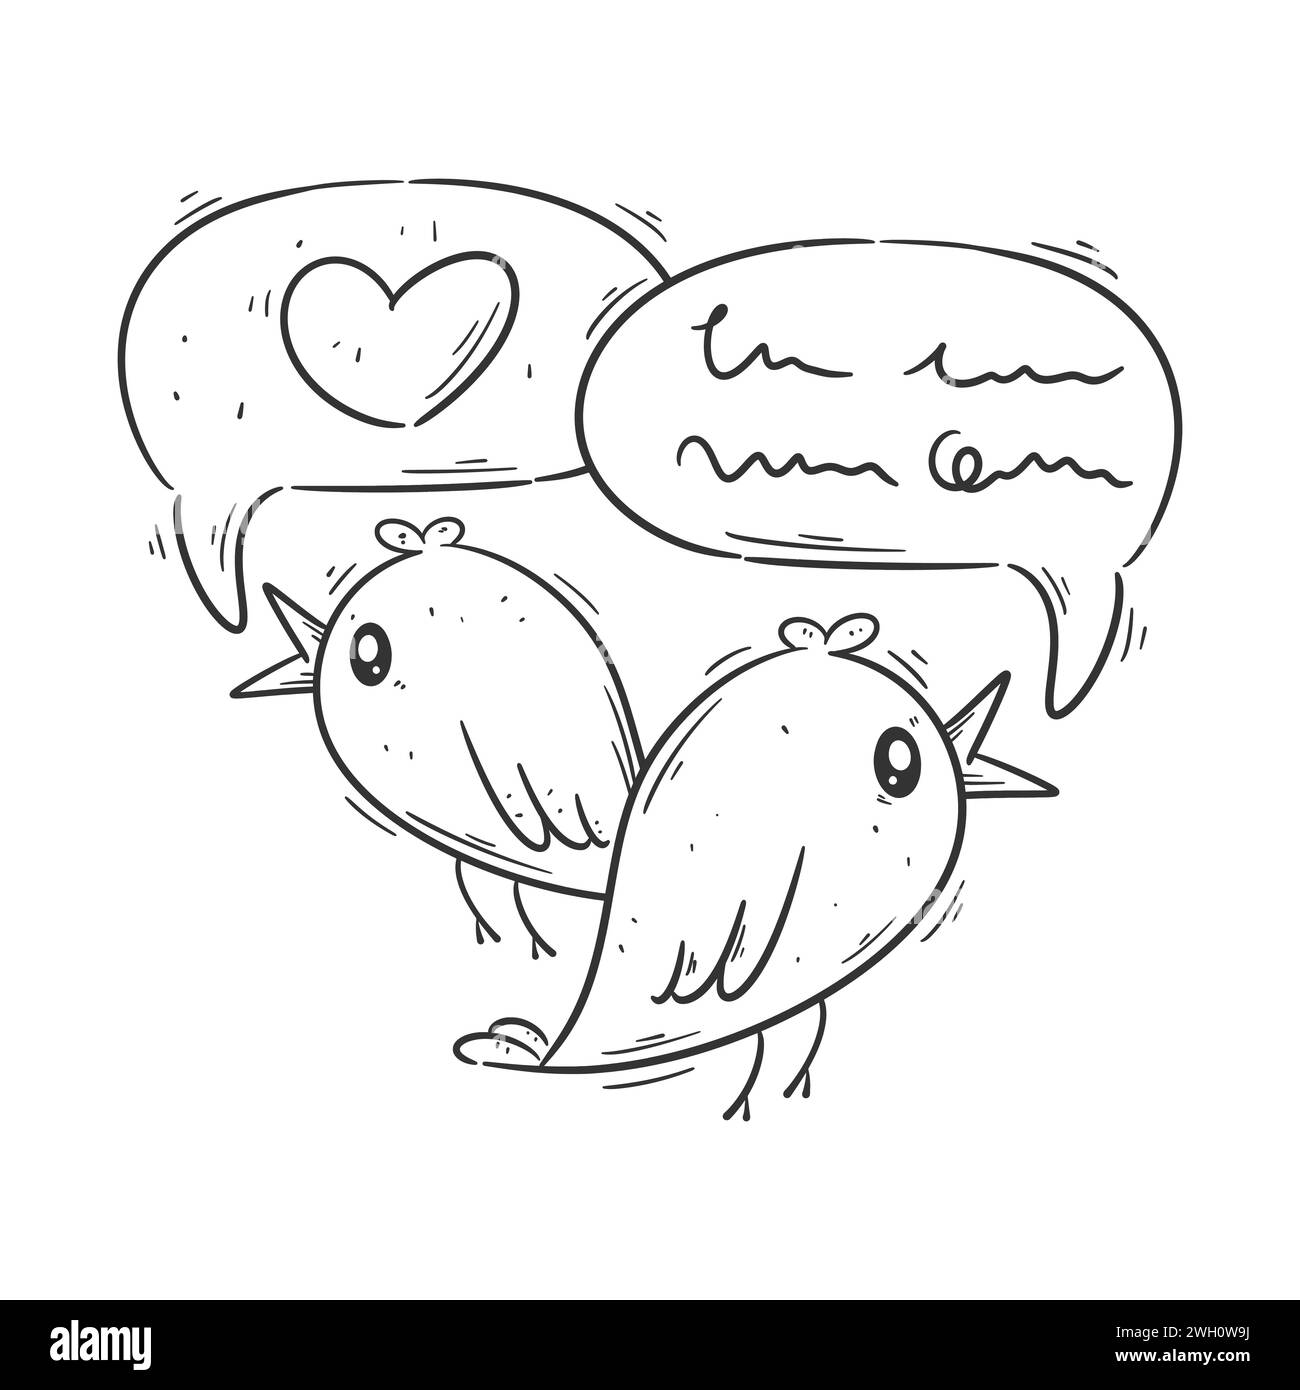 Hand drawn style chat bird design for coloring Stock Vector